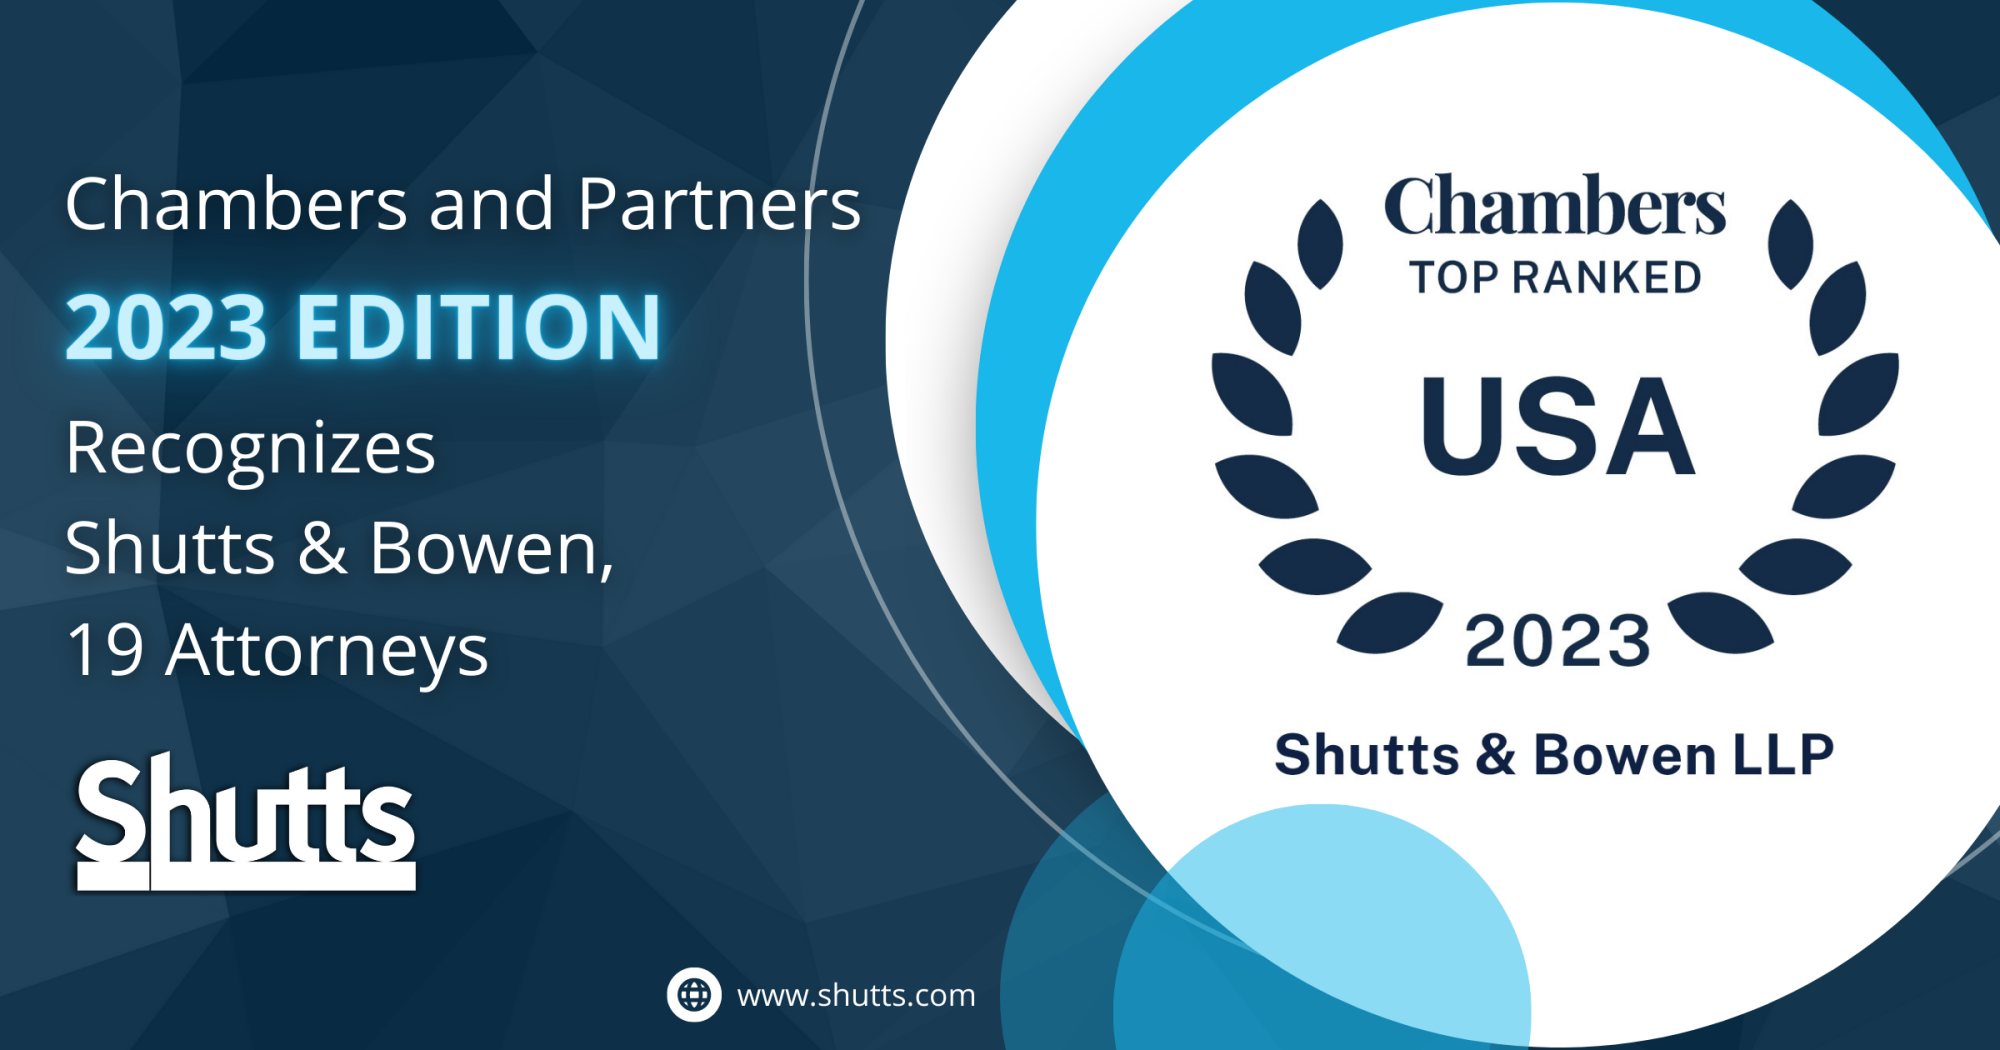 Chambers and Partners 2023 Edition Recognizes Shutts & Bowen, 19 Attorneys